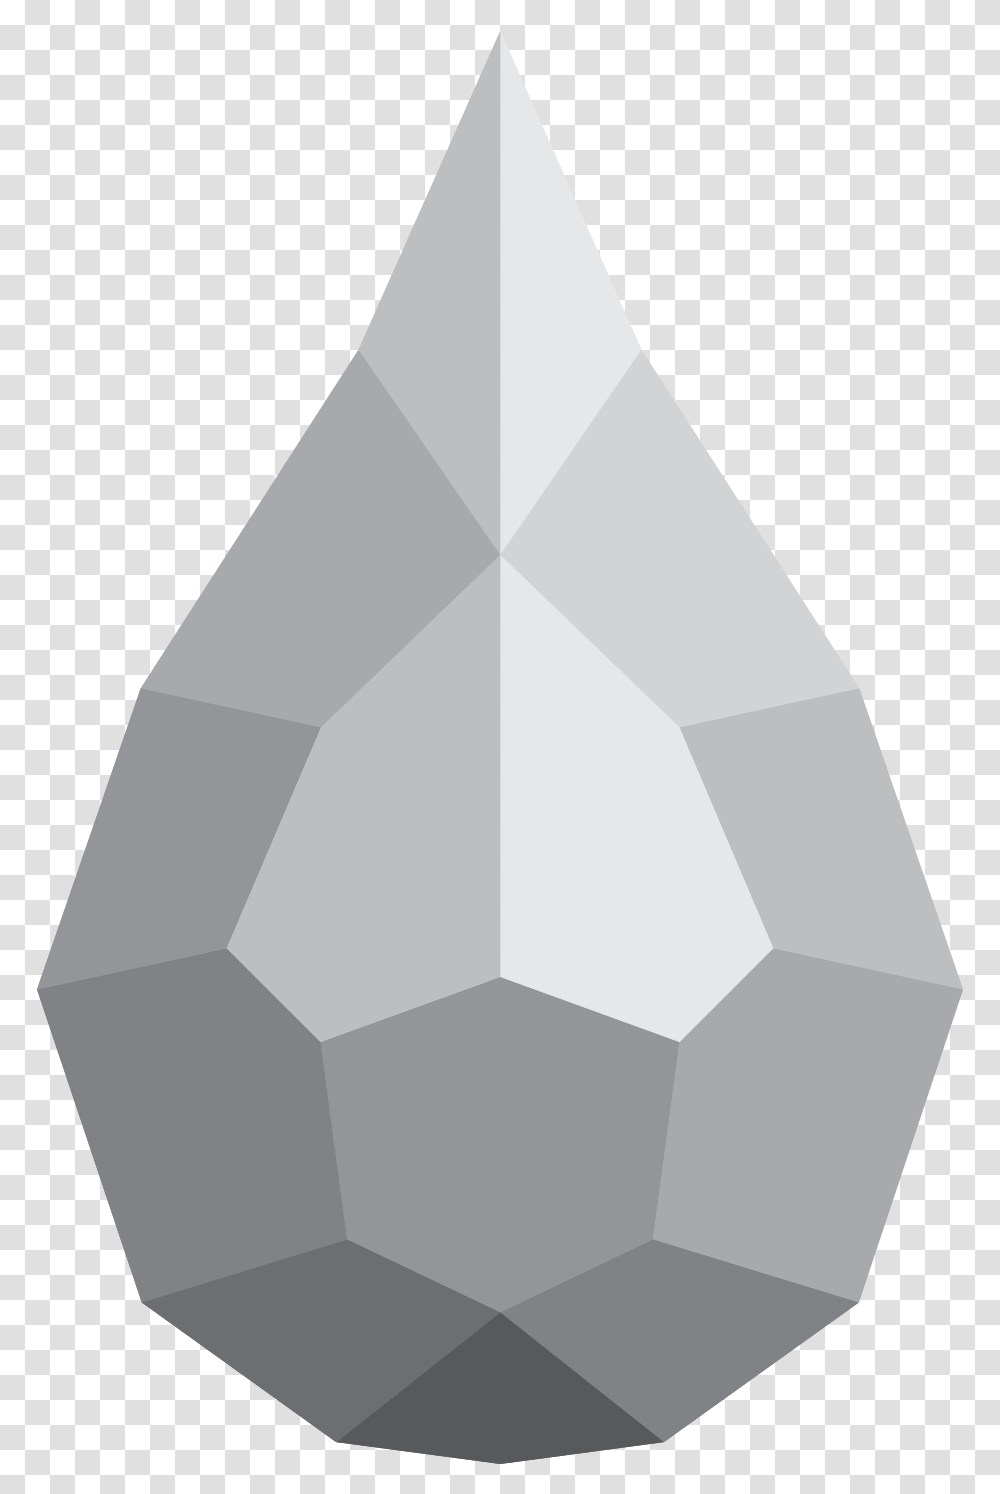 Free Diamond Water Drop With Vertical, Crystal, Rug, Triangle, Lighting Transparent Png